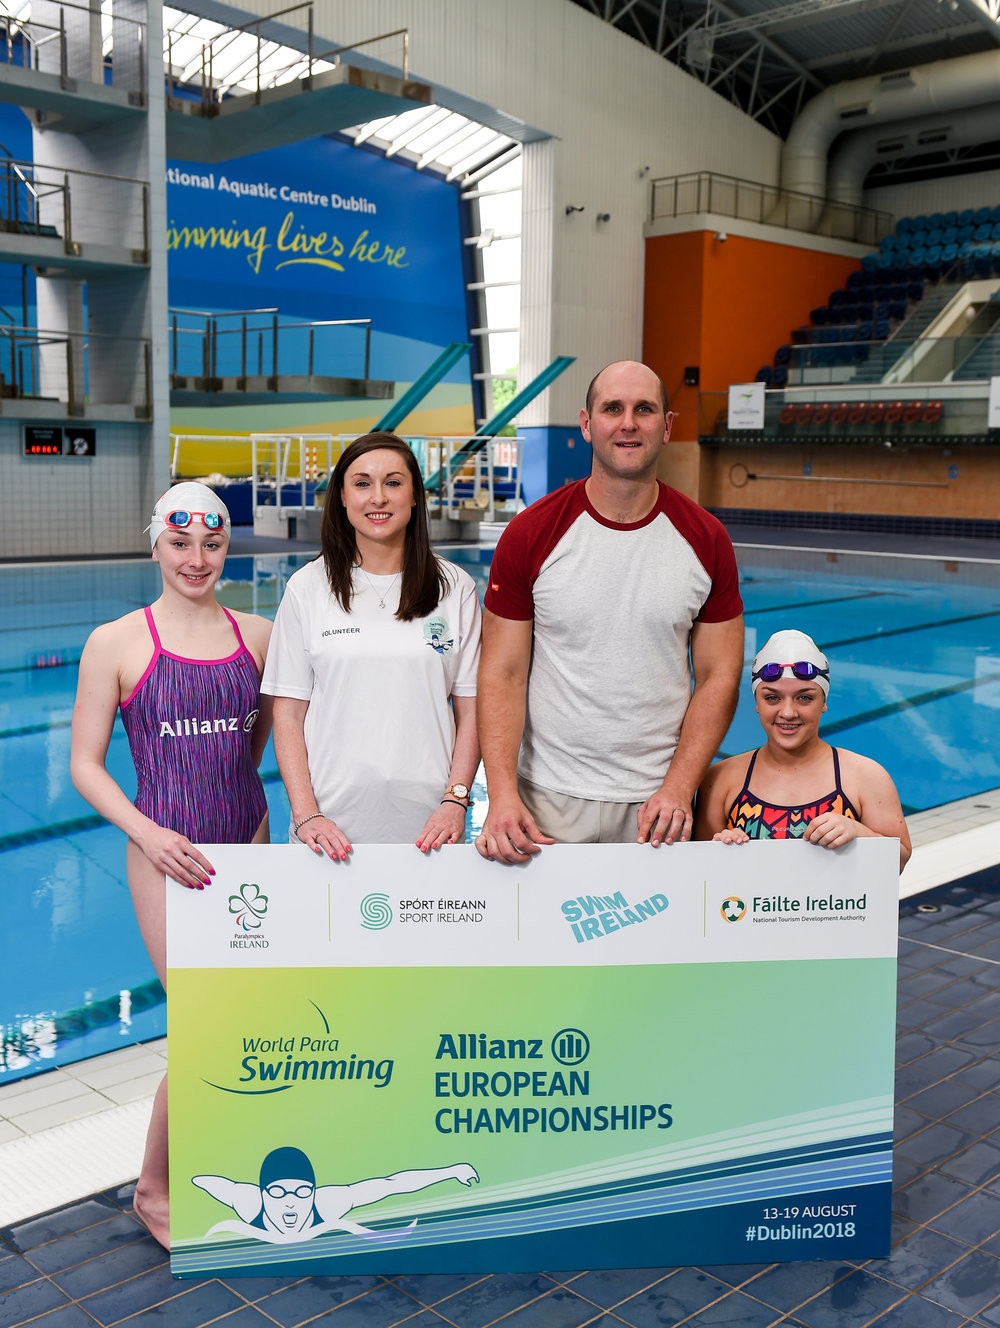 Tickets have been released for the Dublin 2018 World Para Swimming European Championship ©Ireland Paralympics